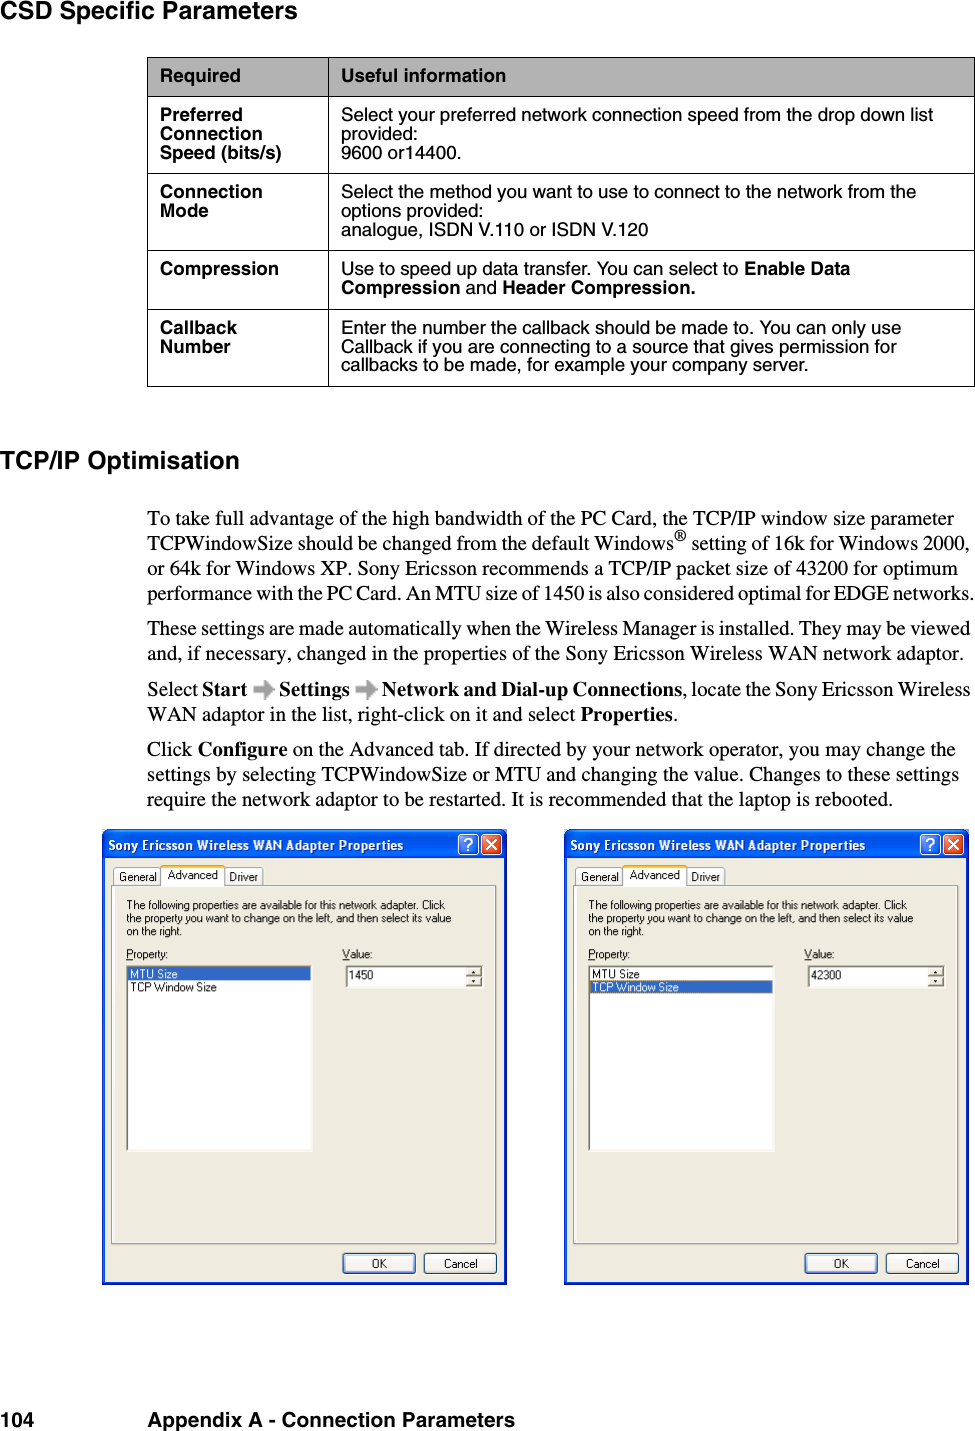 104 Appendix A - Connection ParametersCSD Specific ParametersTCP/IP OptimisationTo take full advantage of the high bandwidth of the PC Card, the TCP/IP window size parameter TCPWindowSize should be changed from the default Windows® setting of 16k for Windows 2000, or 64k for Windows XP. Sony Ericsson recommends a TCP/IP packet size of 43200 for optimum performance with the PC Card. An MTU size of 1450 is also considered optimal for EDGE networks.These settings are made automatically when the Wireless Manager is installed. They may be viewed and, if necessary, changed in the properties of the Sony Ericsson Wireless WAN network adaptor.Select Start   Settings   Network and Dial-up Connections, locate the Sony Ericsson Wireless WAN adaptor in the list, right-click on it and select Properties.Click Configure on the Advanced tab. If directed by your network operator, you may change the settings by selecting TCPWindowSize or MTU and changing the value. Changes to these settings require the network adaptor to be restarted. It is recommended that the laptop is rebooted.Required Useful informationPreferred Connection Speed (bits/s)Select your preferred network connection speed from the drop down list provided:9600 or14400.Connection ModeSelect the method you want to use to connect to the network from the options provided:analogue, ISDN V.110 or ISDN V.120Compression Use to speed up data transfer. You can select to Enable Data Compression and Header Compression.Callback NumberEnter the number the callback should be made to. You can only use Callback if you are connecting to a source that gives permission for callbacks to be made, for example your company server.